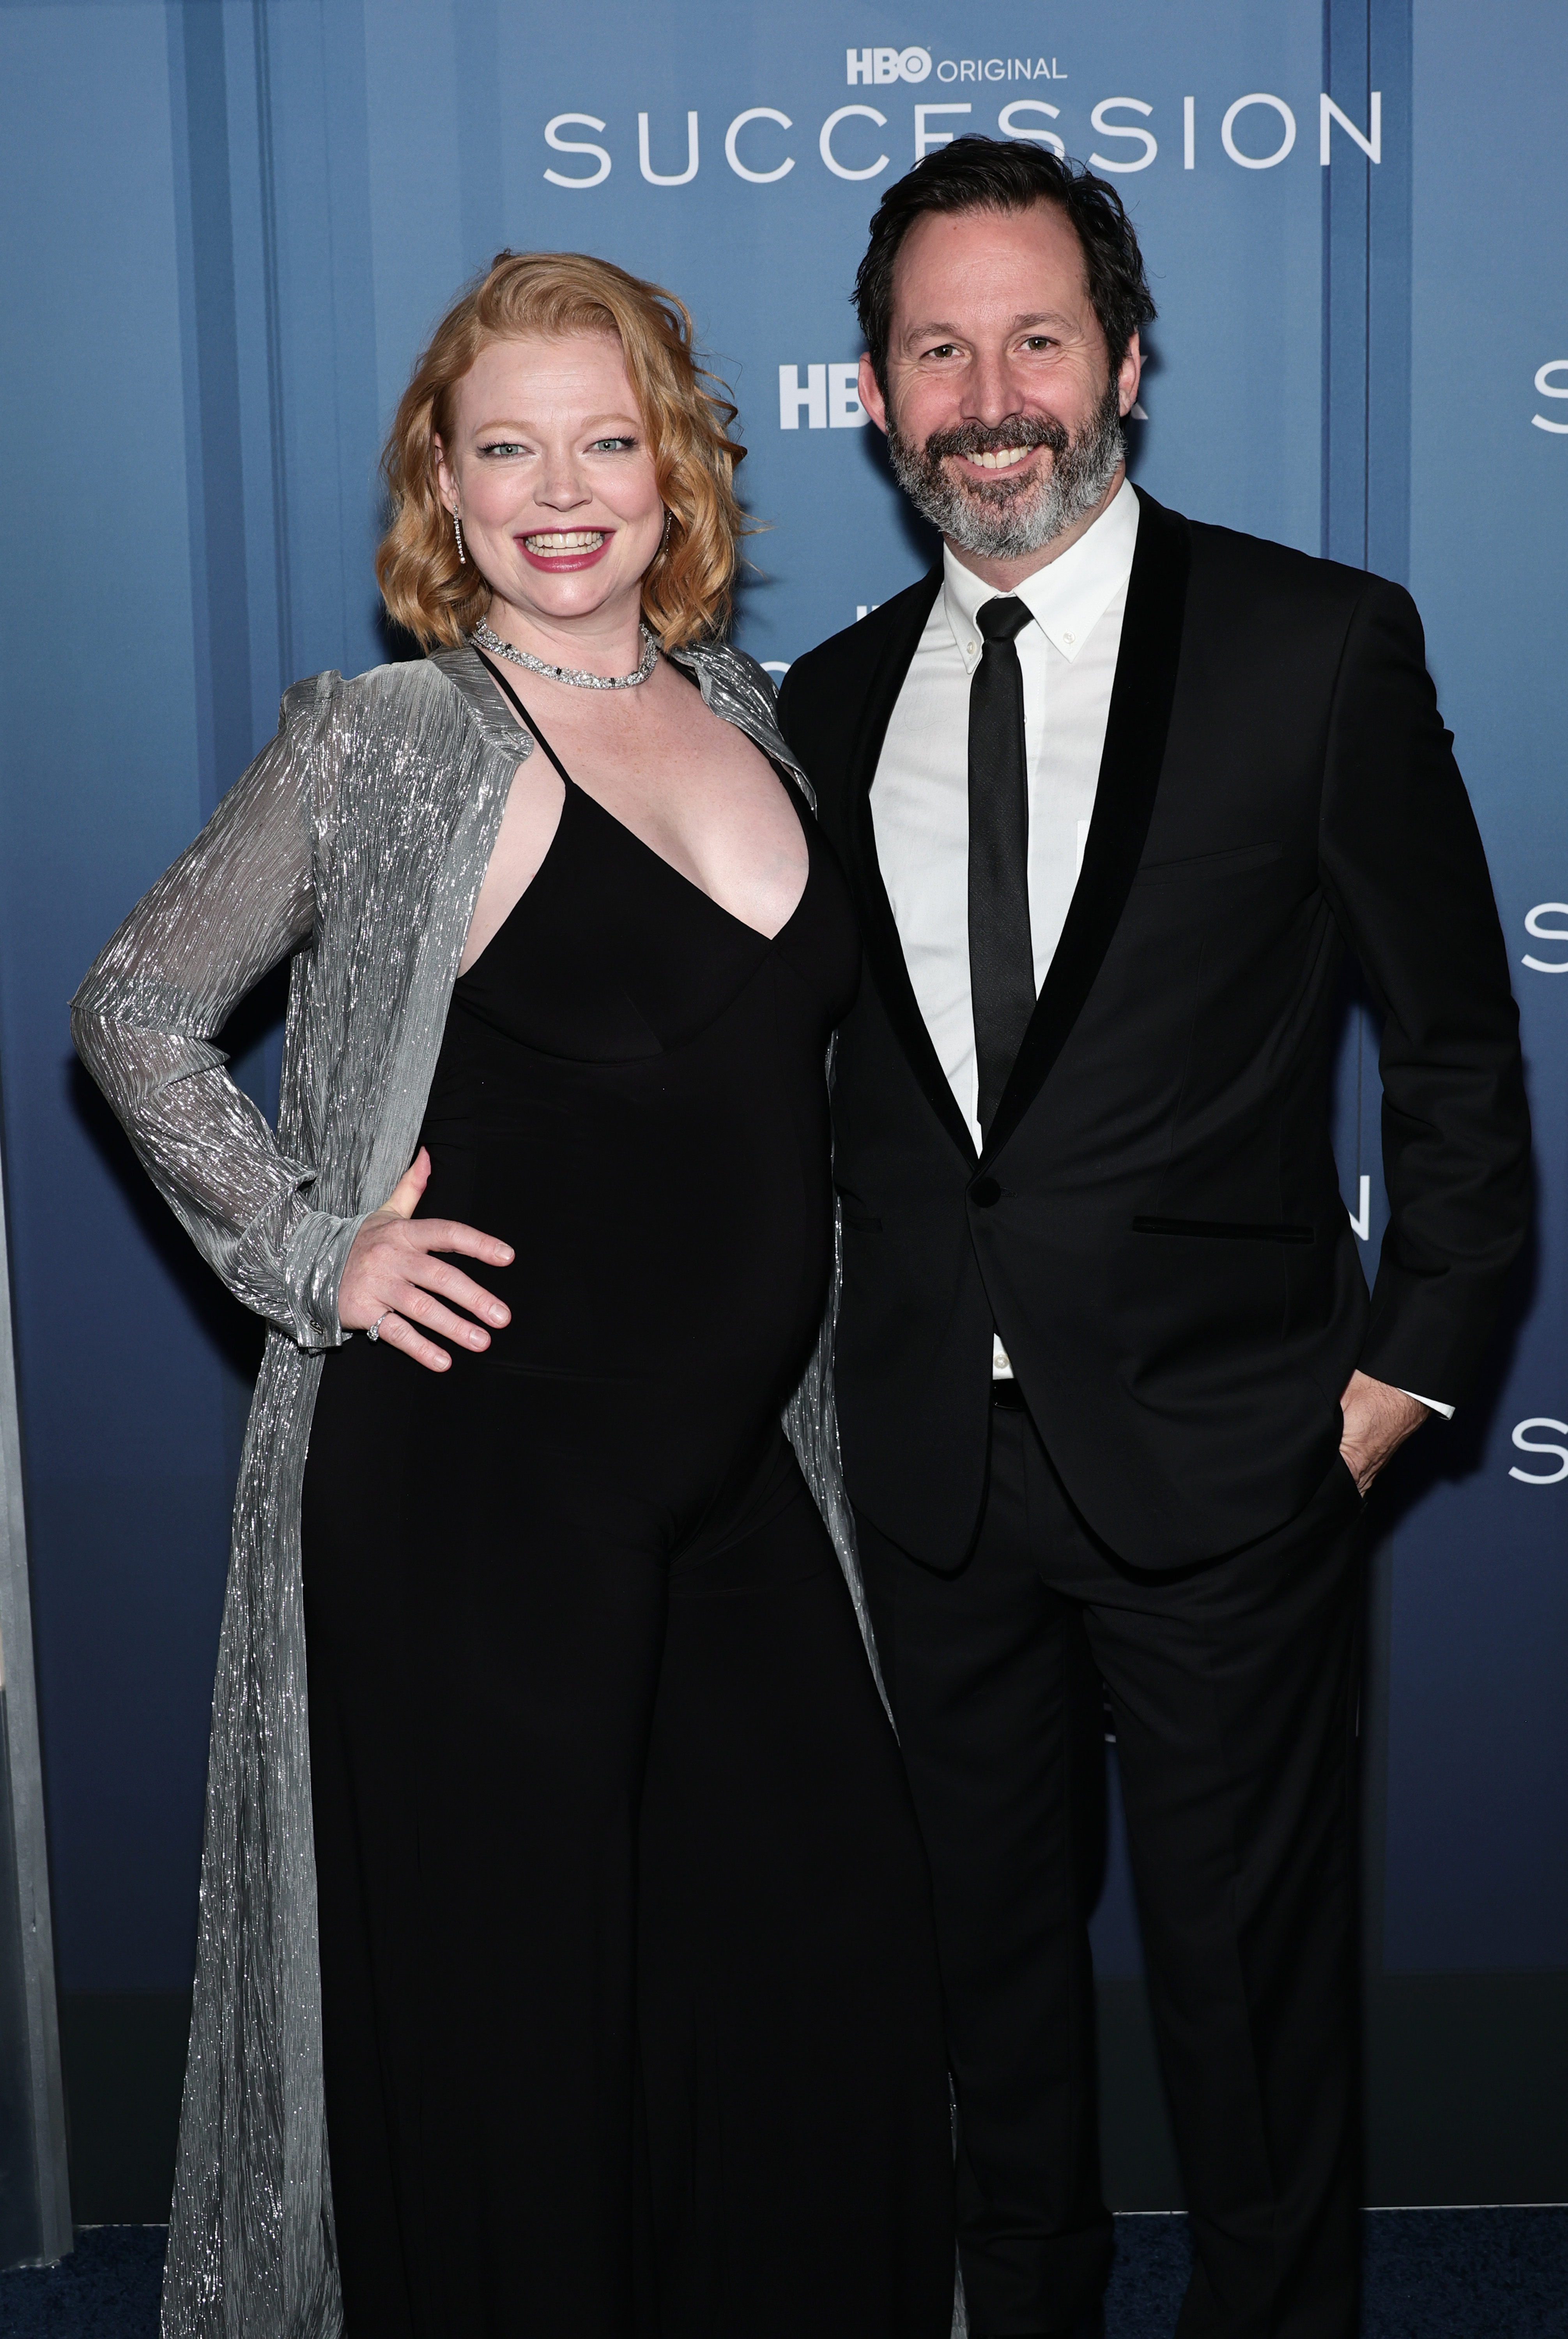 Sarah Snook and Dave Lawson expecting first child